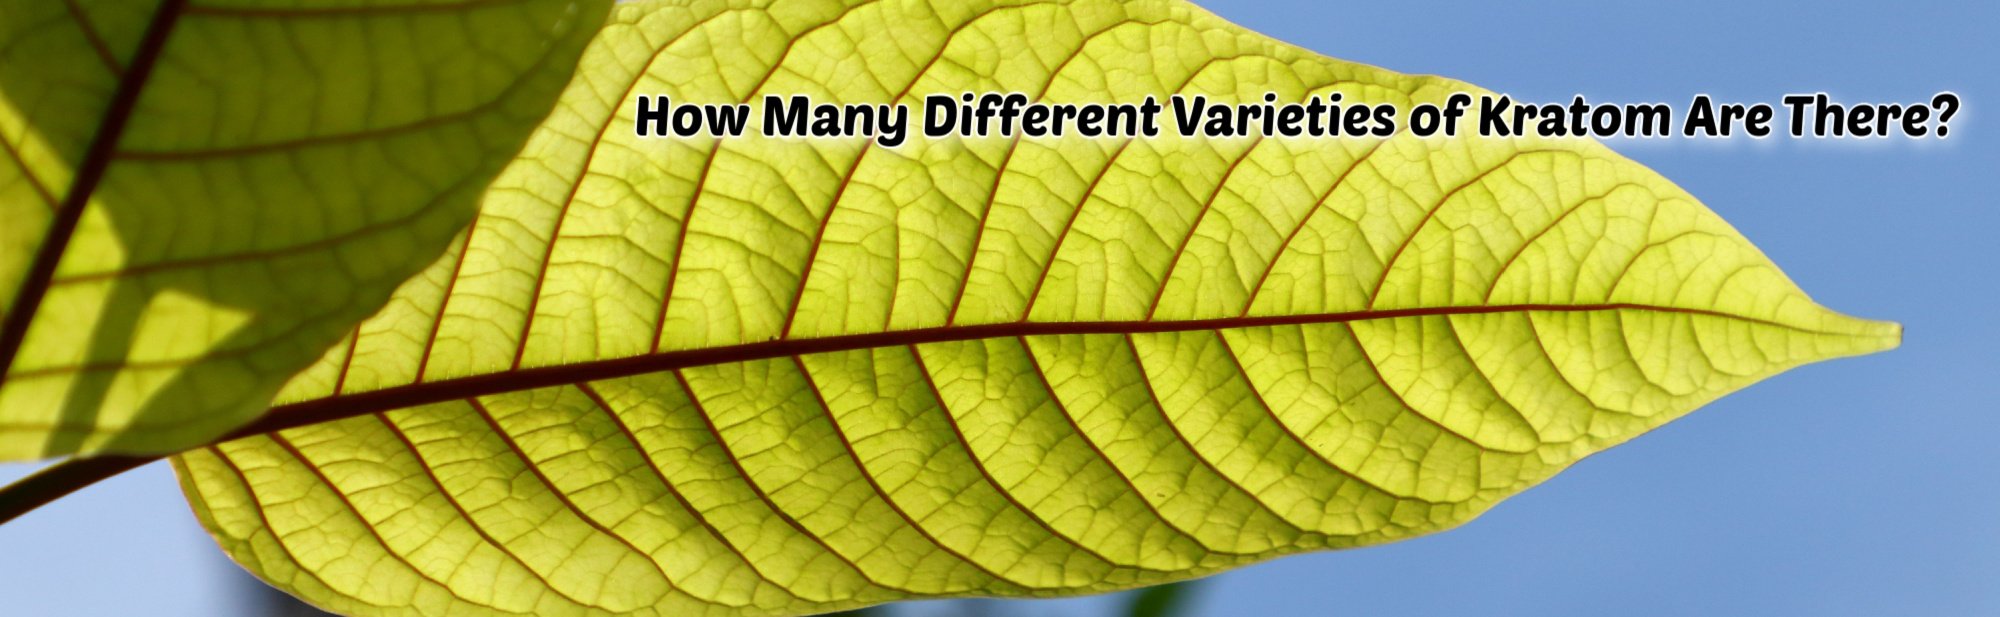 image of how many different varities of kratom are there